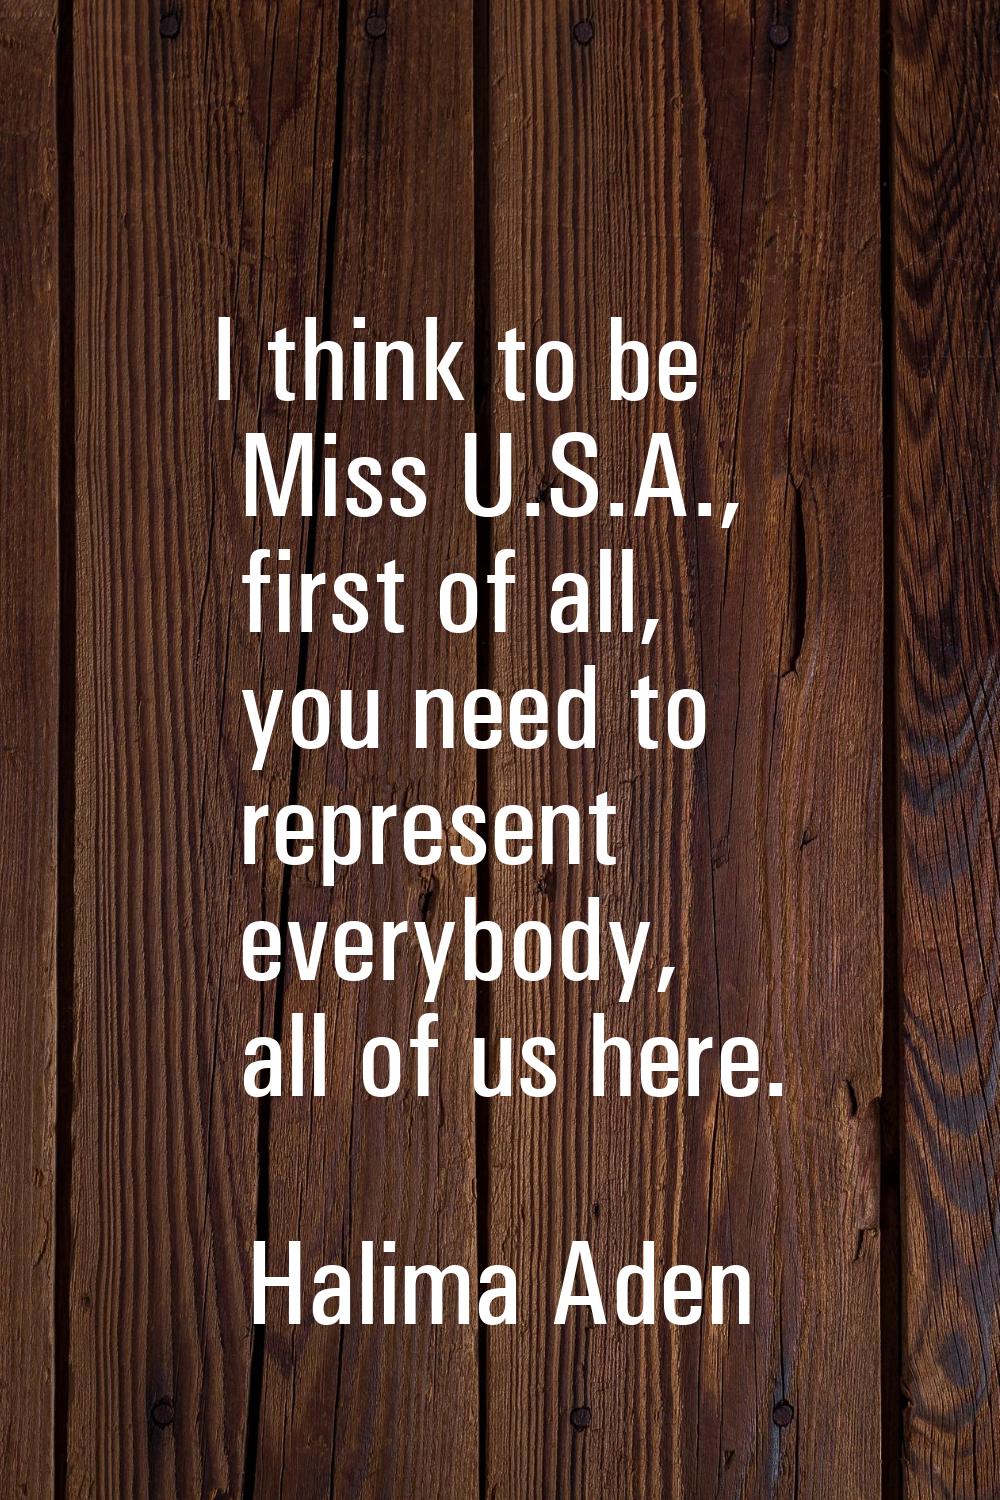 I think to be Miss U.S.A., first of all, you need to represent everybody, all of us here.